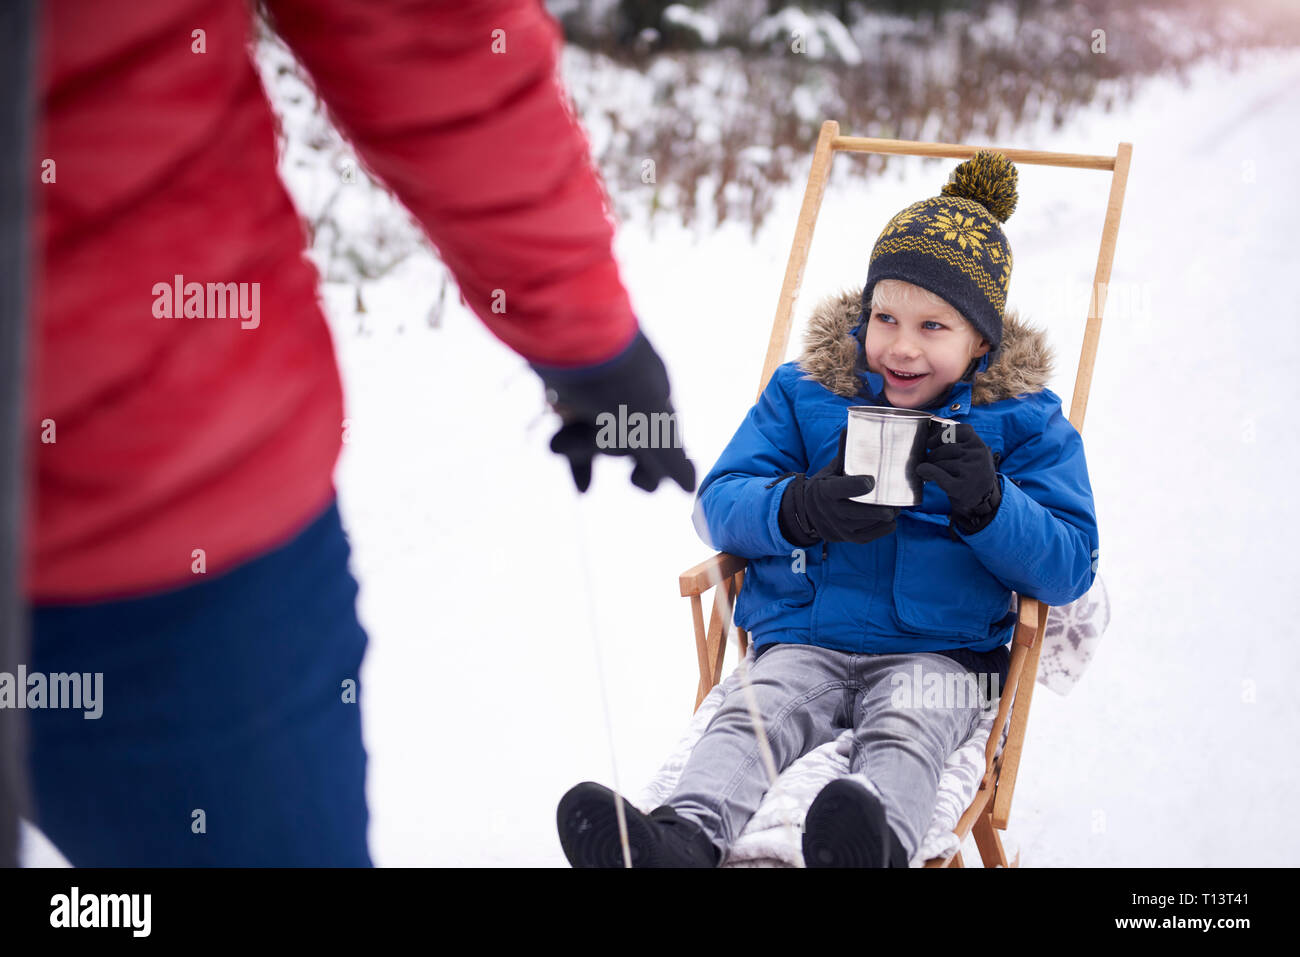 https://c8.alamy.com/comp/T13T41/portrait-of-smiling-little-boy-drinking-tea-while-his-father-pulling-the-sledge-T13T41.jpg